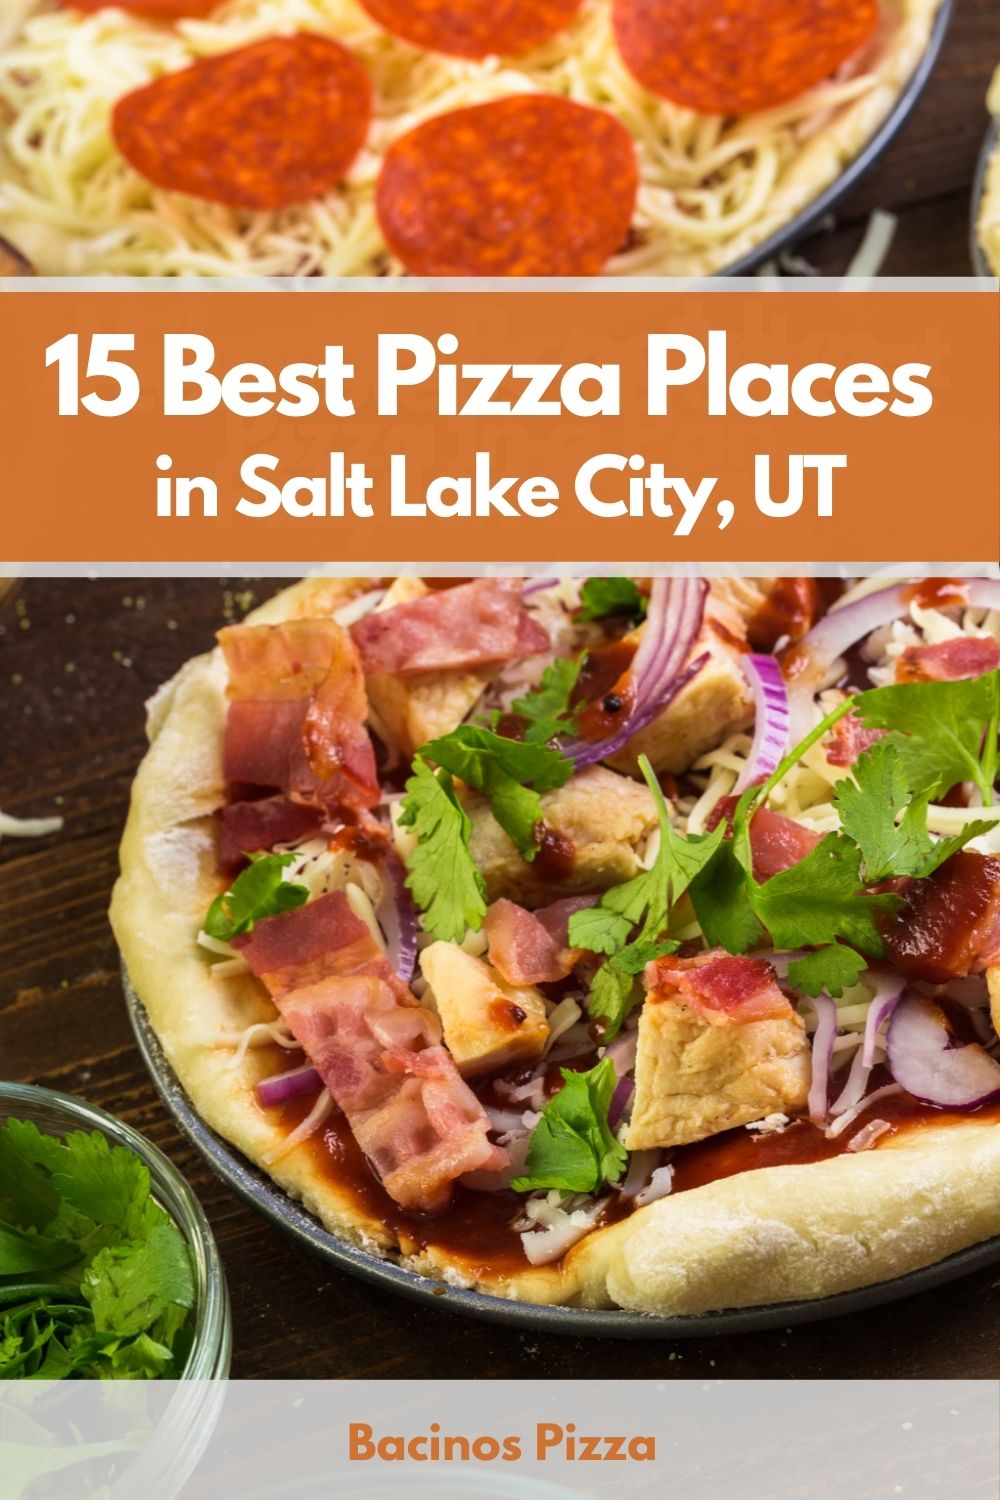 15 Best Pizza Places in Salt Lake City, UT pin